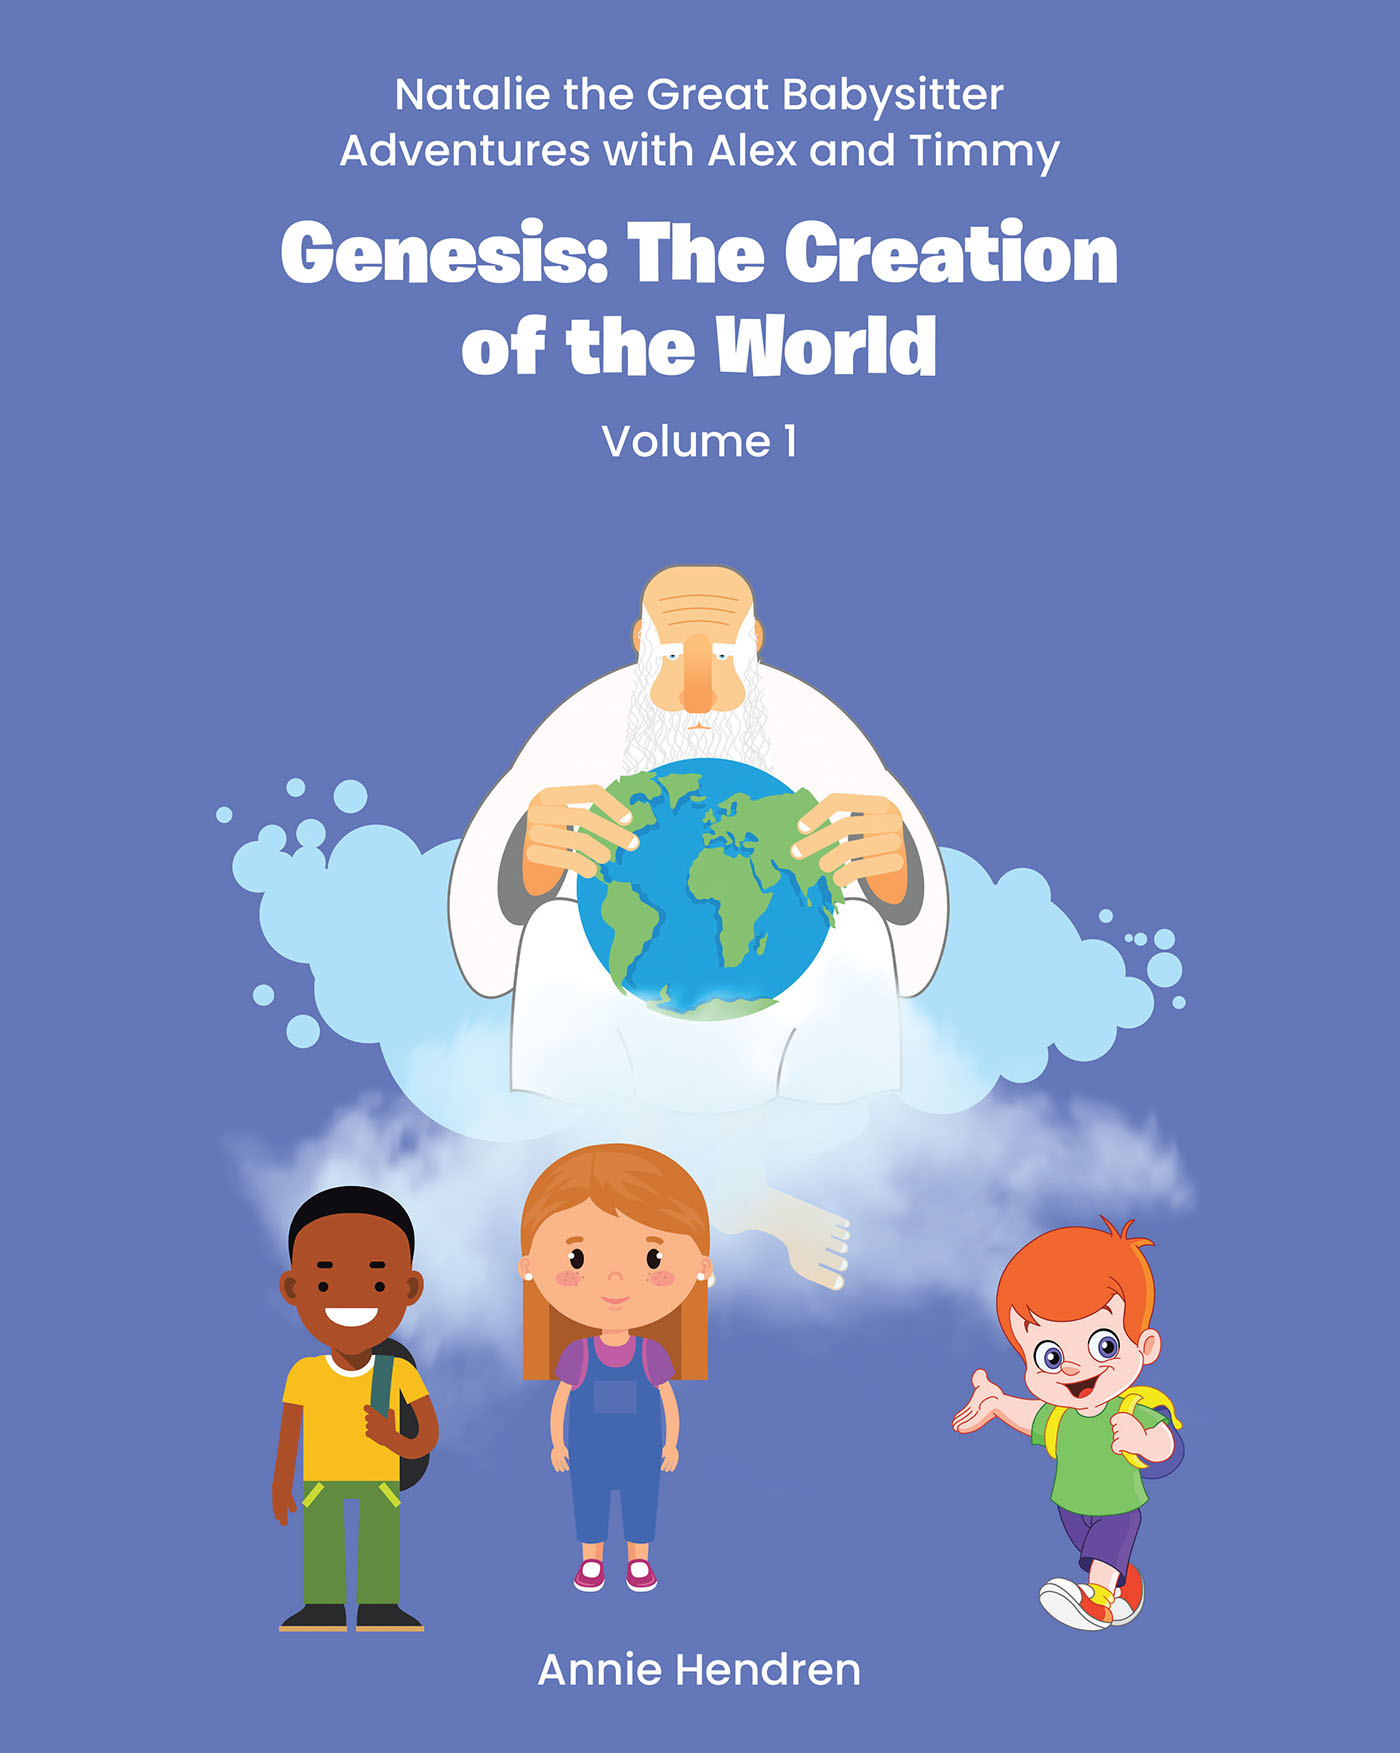 Annie Hendren’s Newly Released "Genesis: The Creation of the World: Volume 1" is an Engaging Journey Into the World of Understanding God